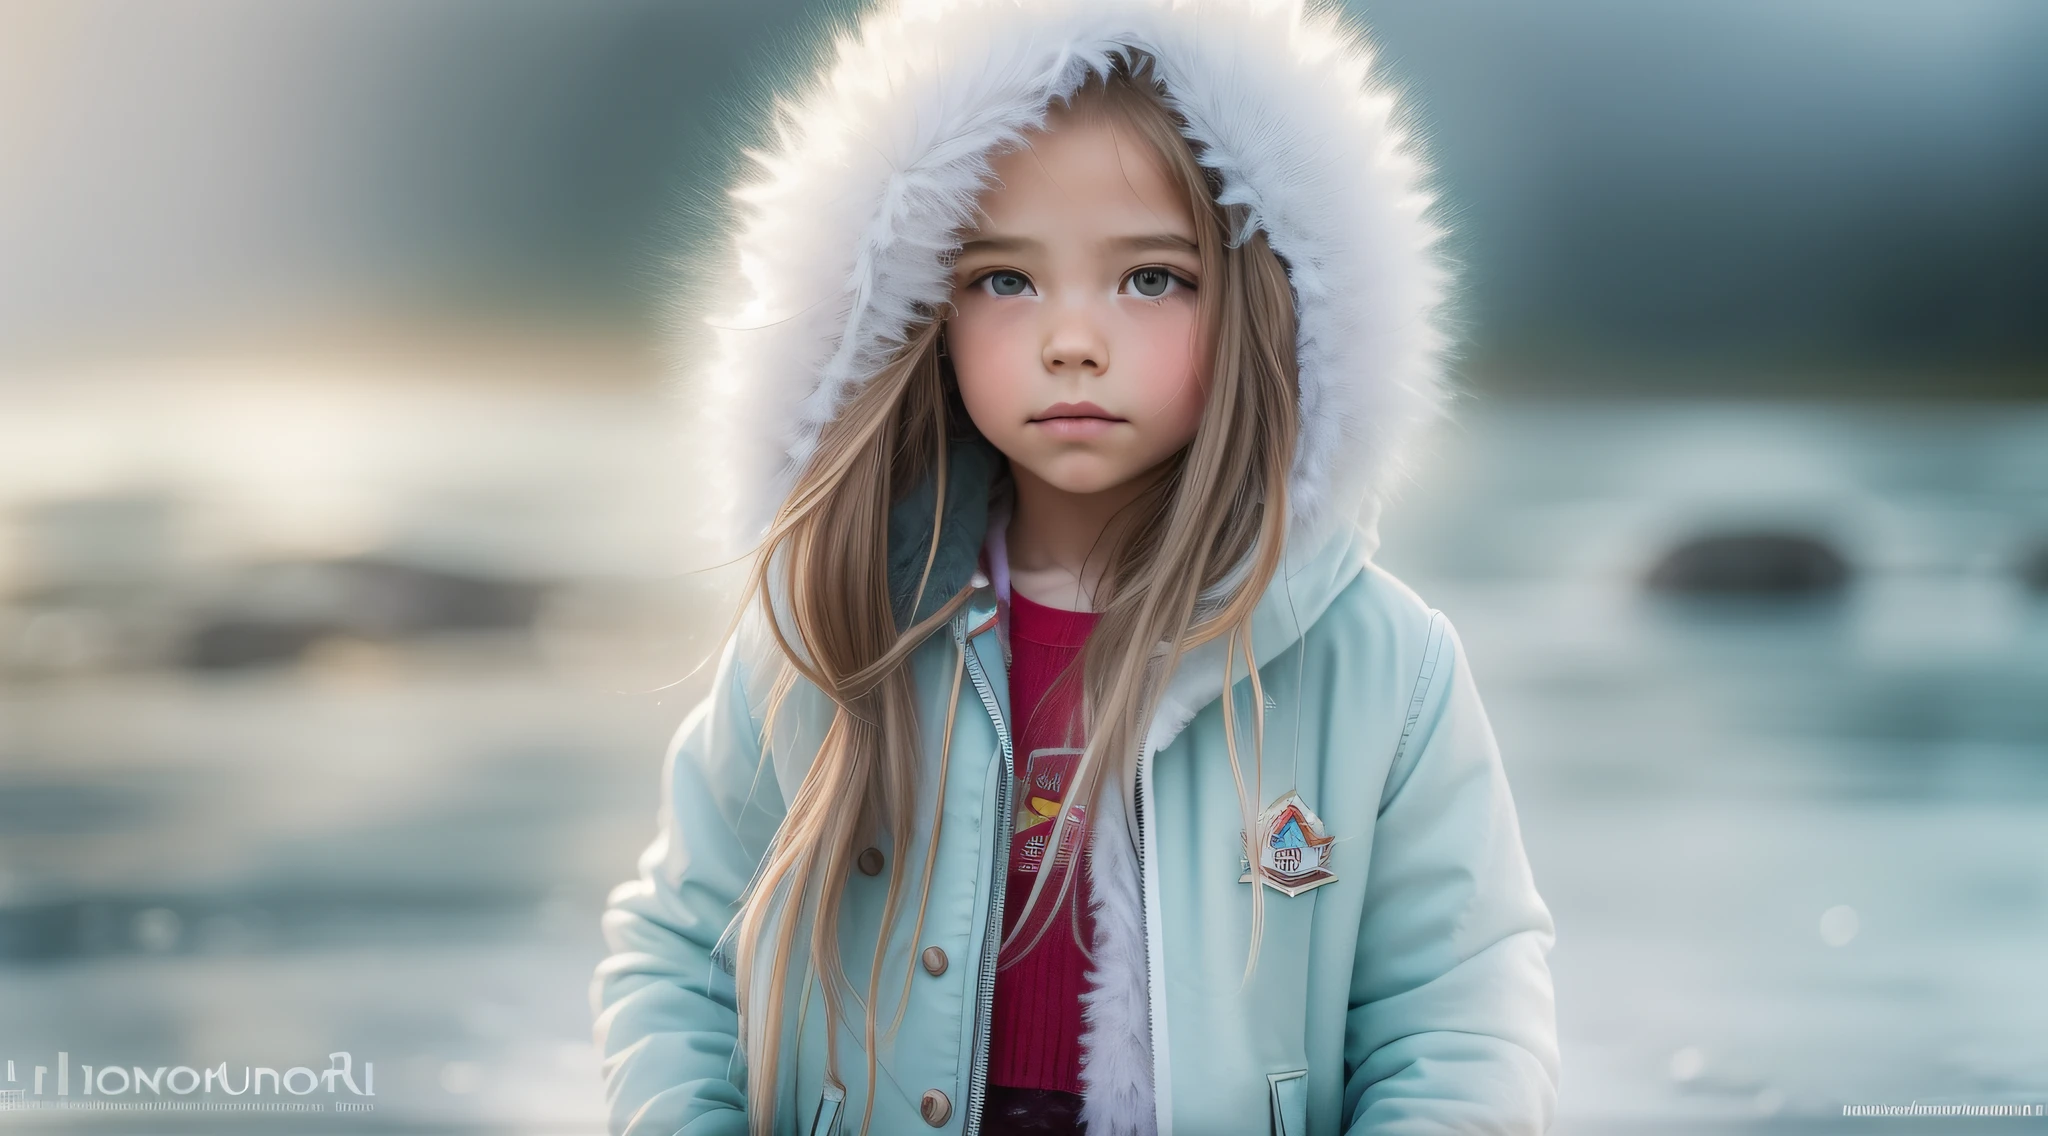 best qualityer, work-before, ultra high nothing, photorrealistic, raw-photo, GIRL KIDS , russian blonde long straight hair, with red leather jacket outfit, Estilo Retrato,ice, Glace, frost, ice.